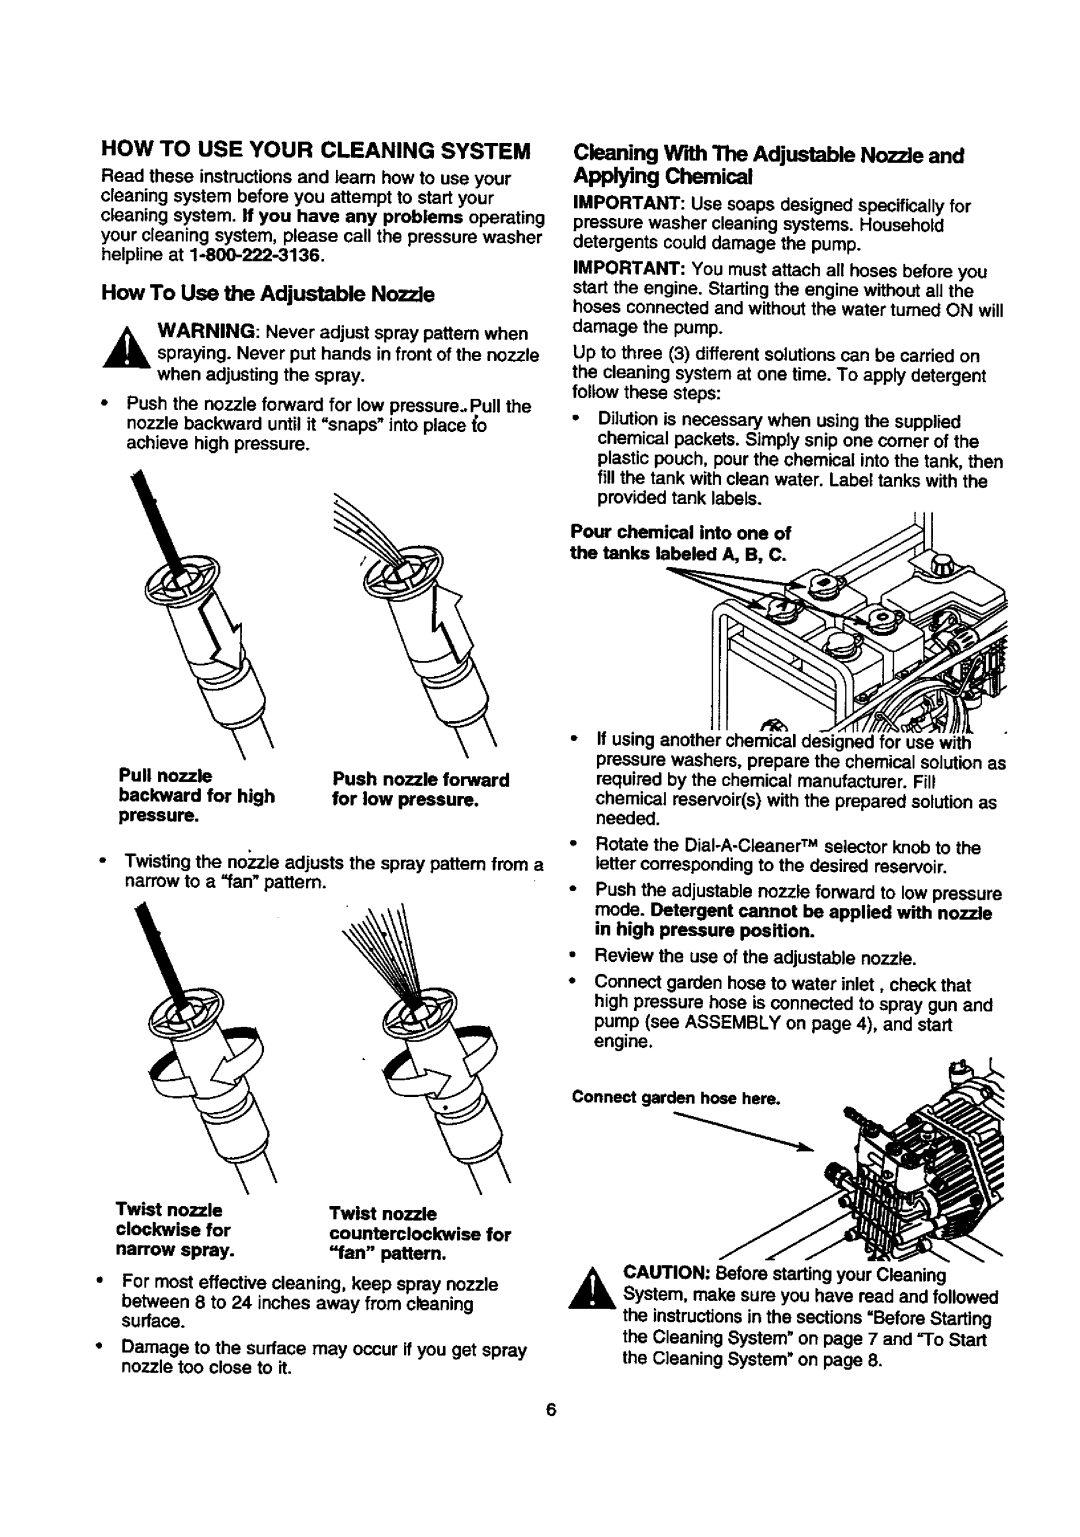 Craftsman 580.768030 operating instructions How To Use Your Cleaning System, How To Use the Adjustable Nozzle 